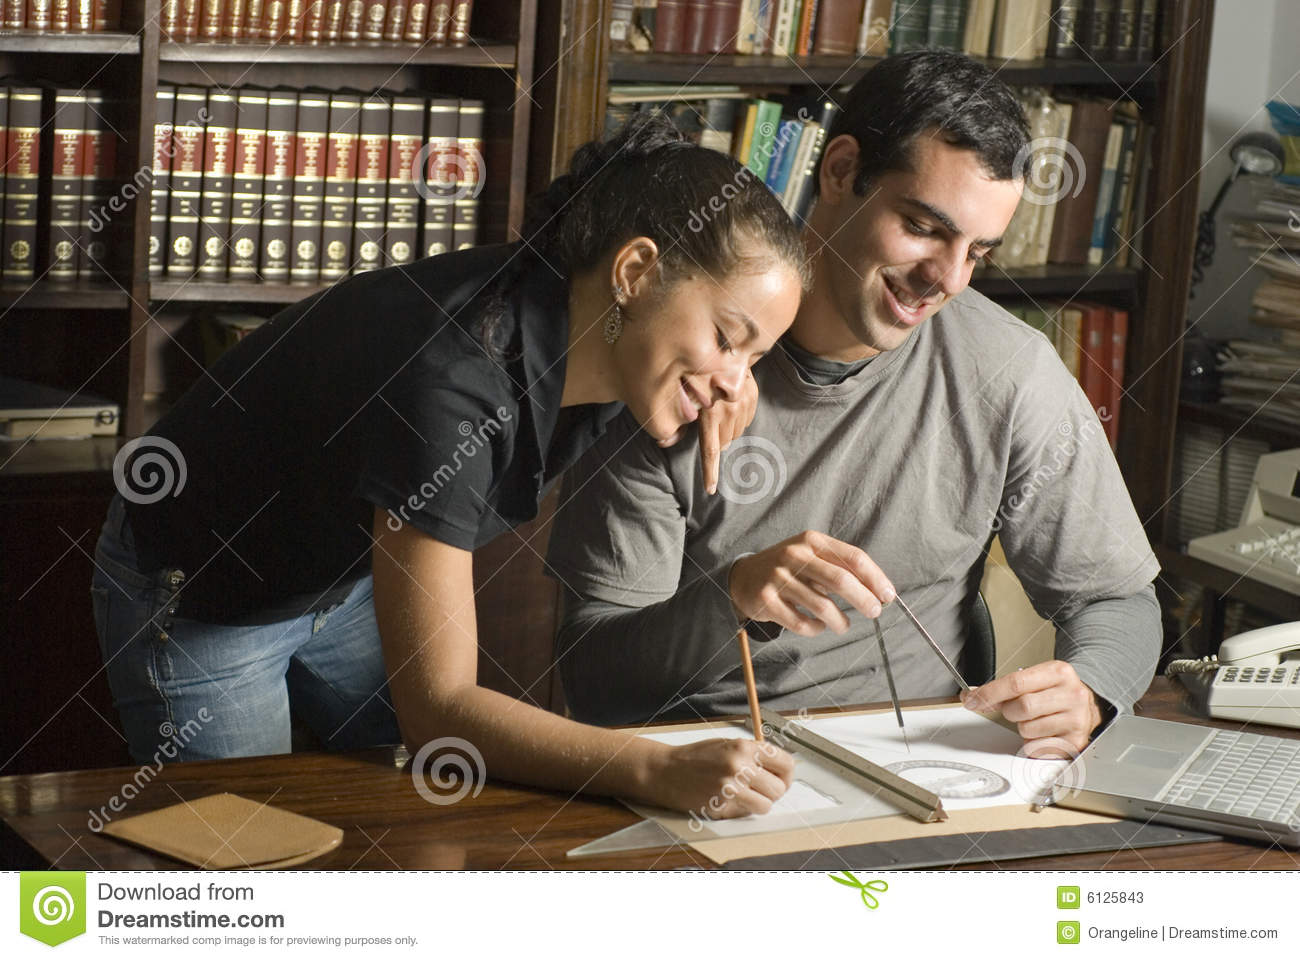 Couple Study in Library - Horizontal Stock Image - Image of books ...